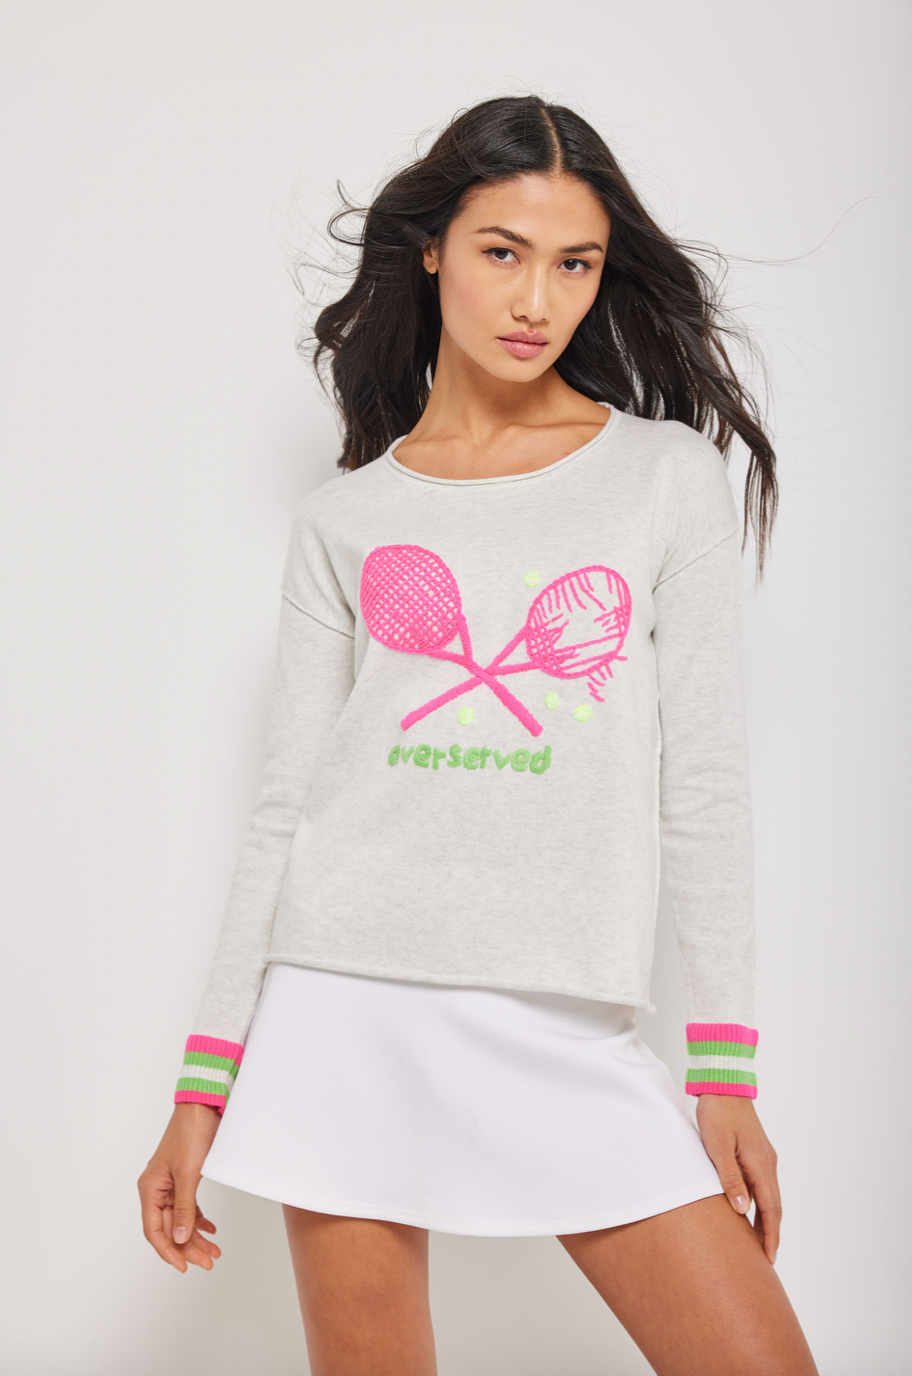 Overserved Tennis  Sweater *FINAL SALE ITEM